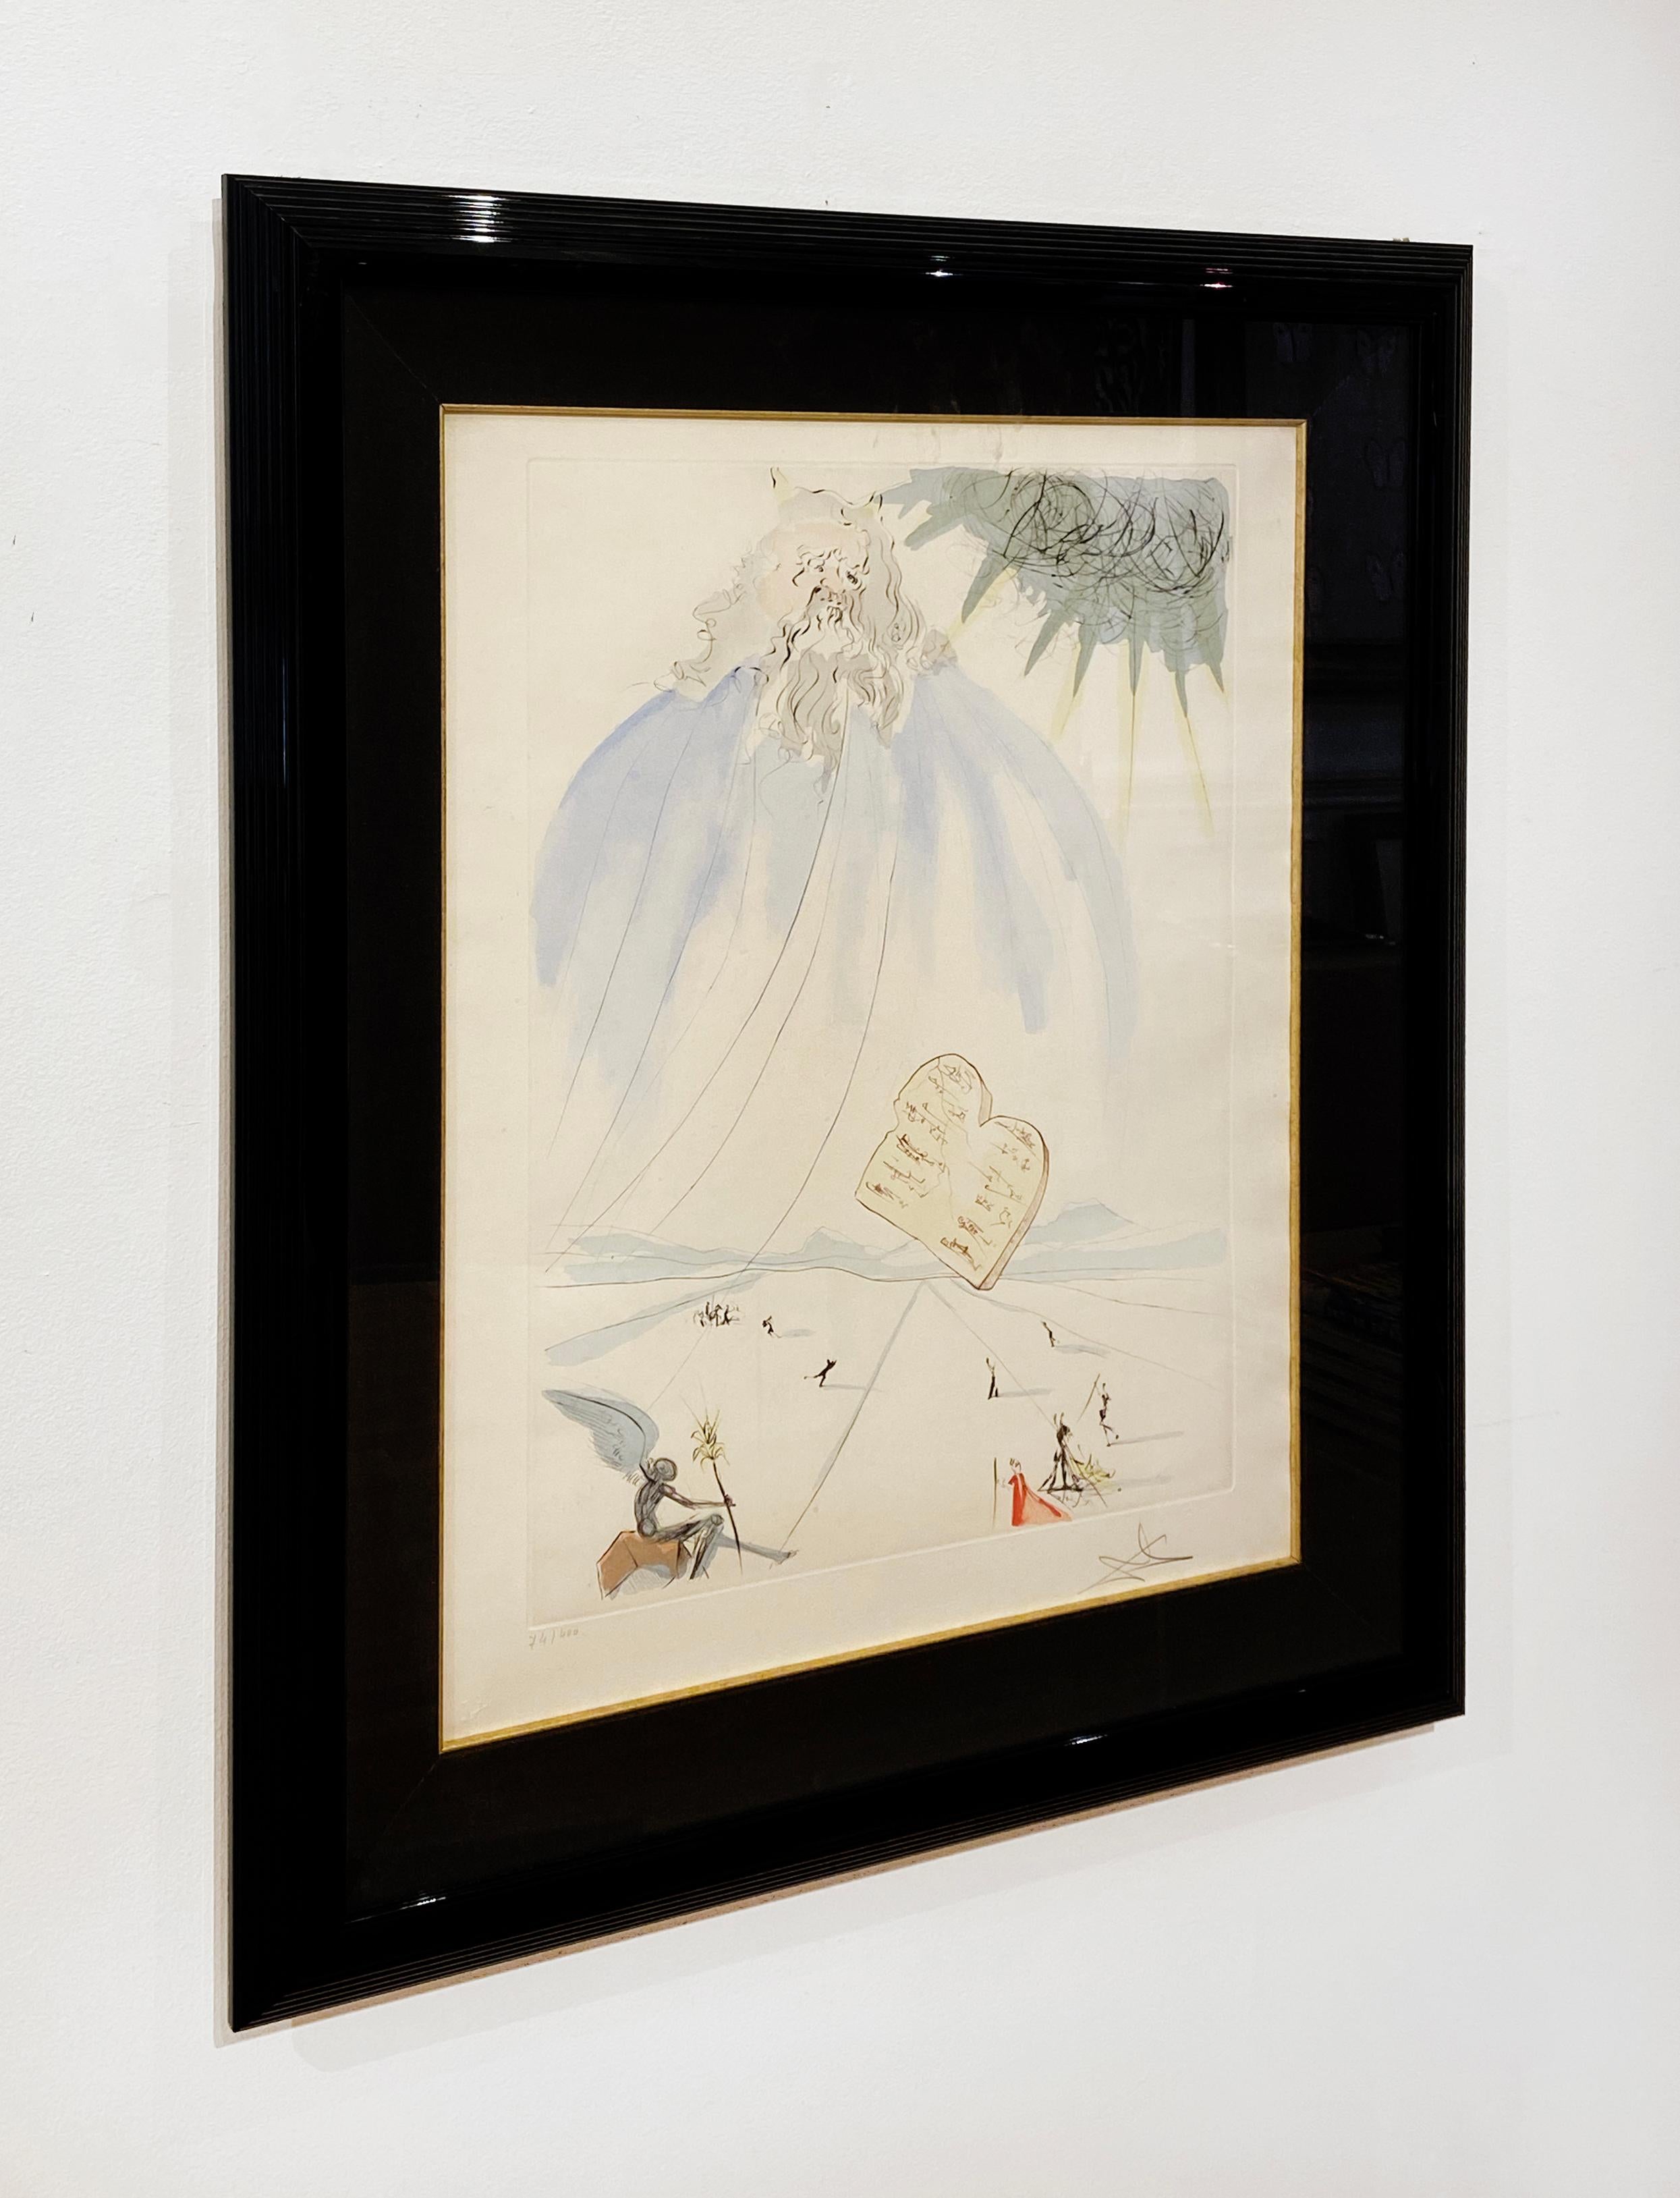 Artist:  Dali, Salvador
Title:  Moses
Series:  Our Historical Heritage
Date:  1975
Medium:  drypoint with added color
Unframed Dimensions: 26